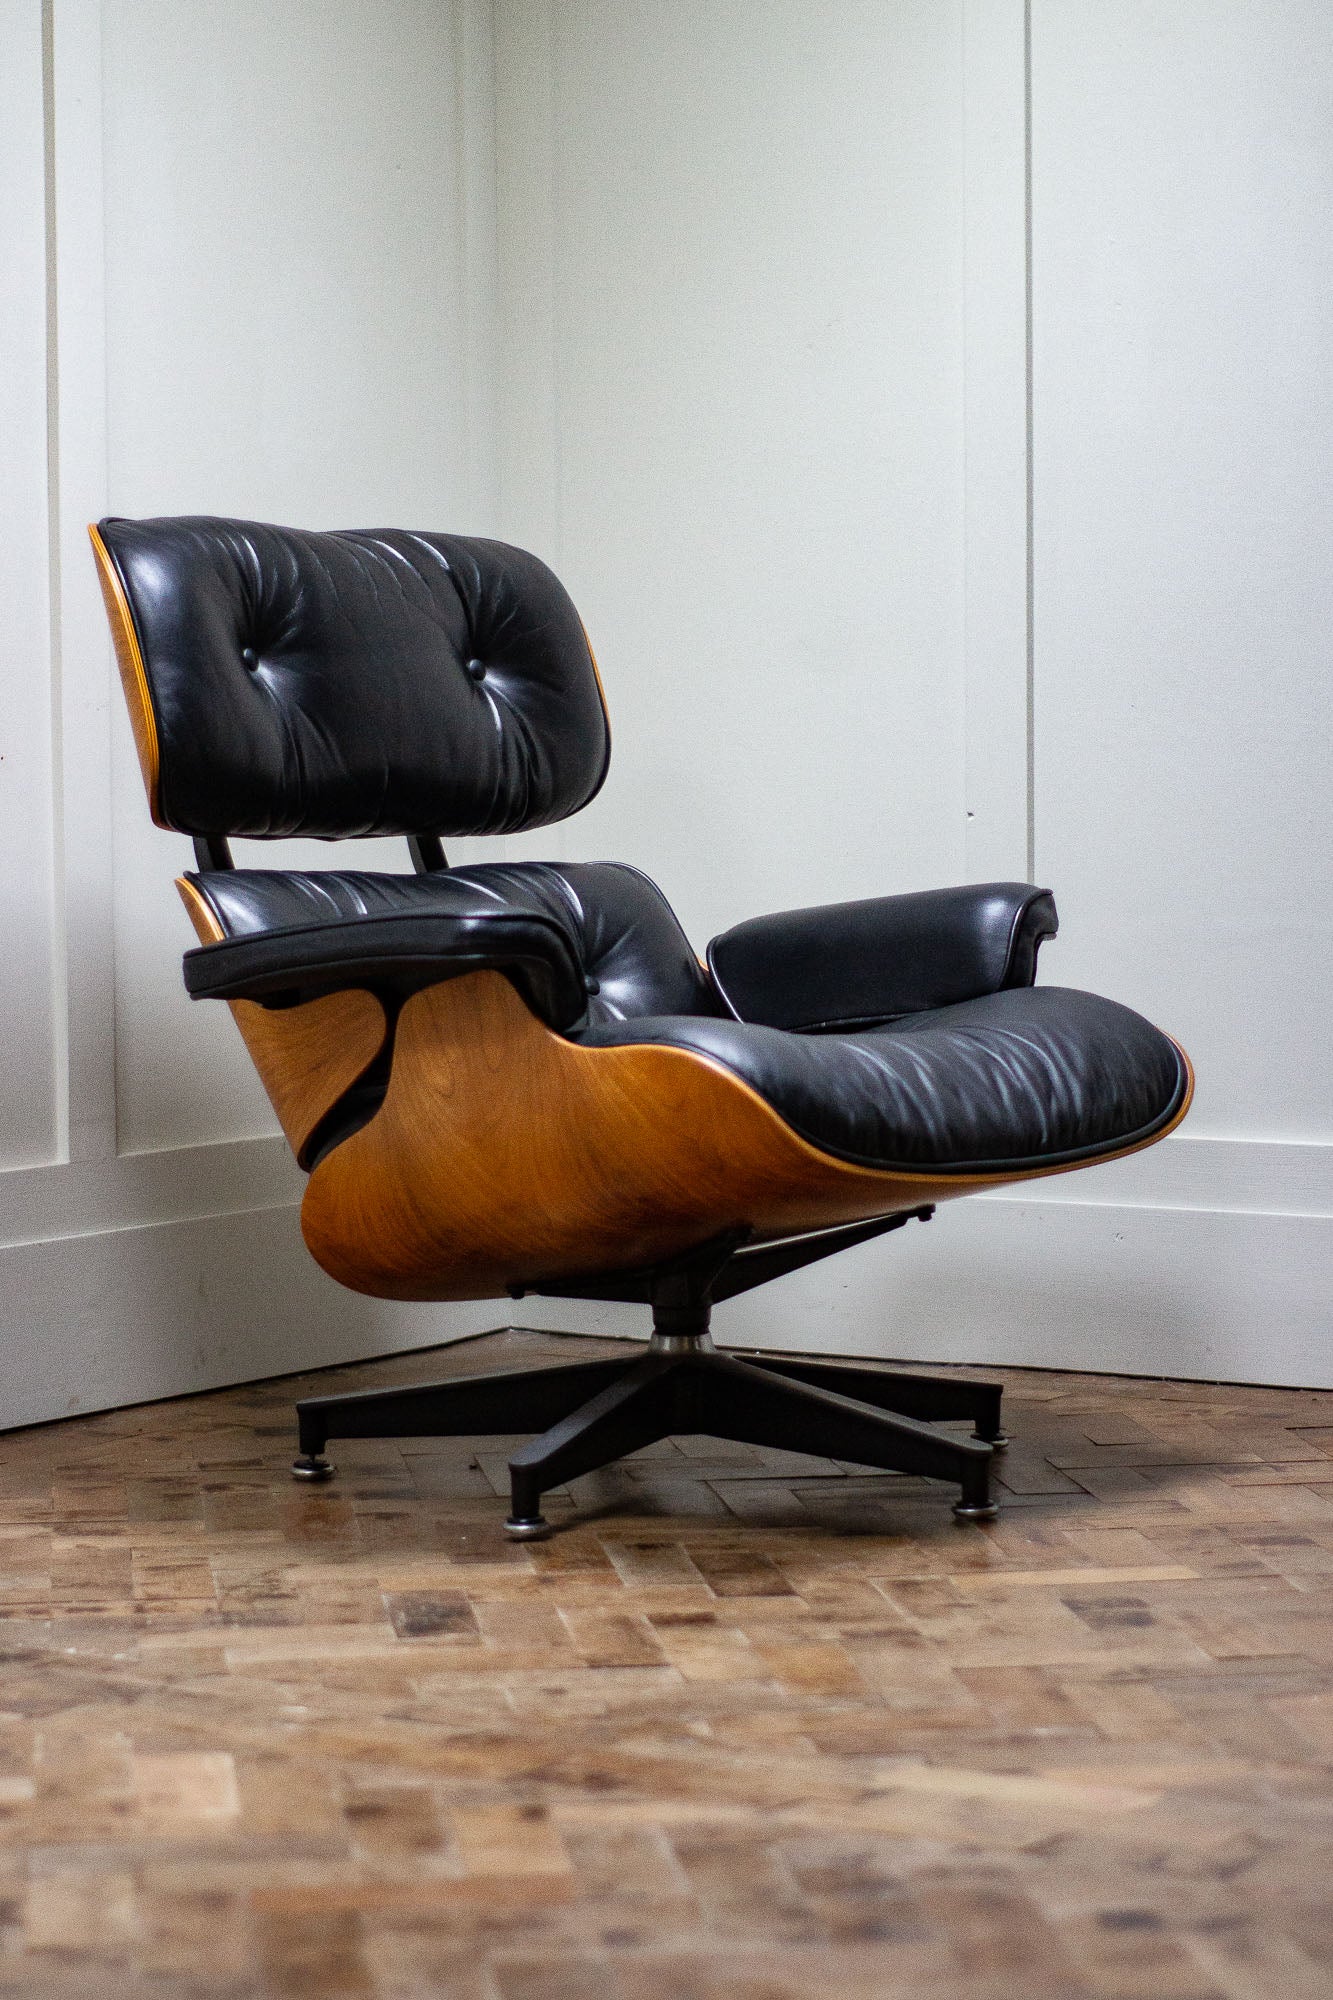 Original Charles Ray Eames Lounge Chair By Herman Miller